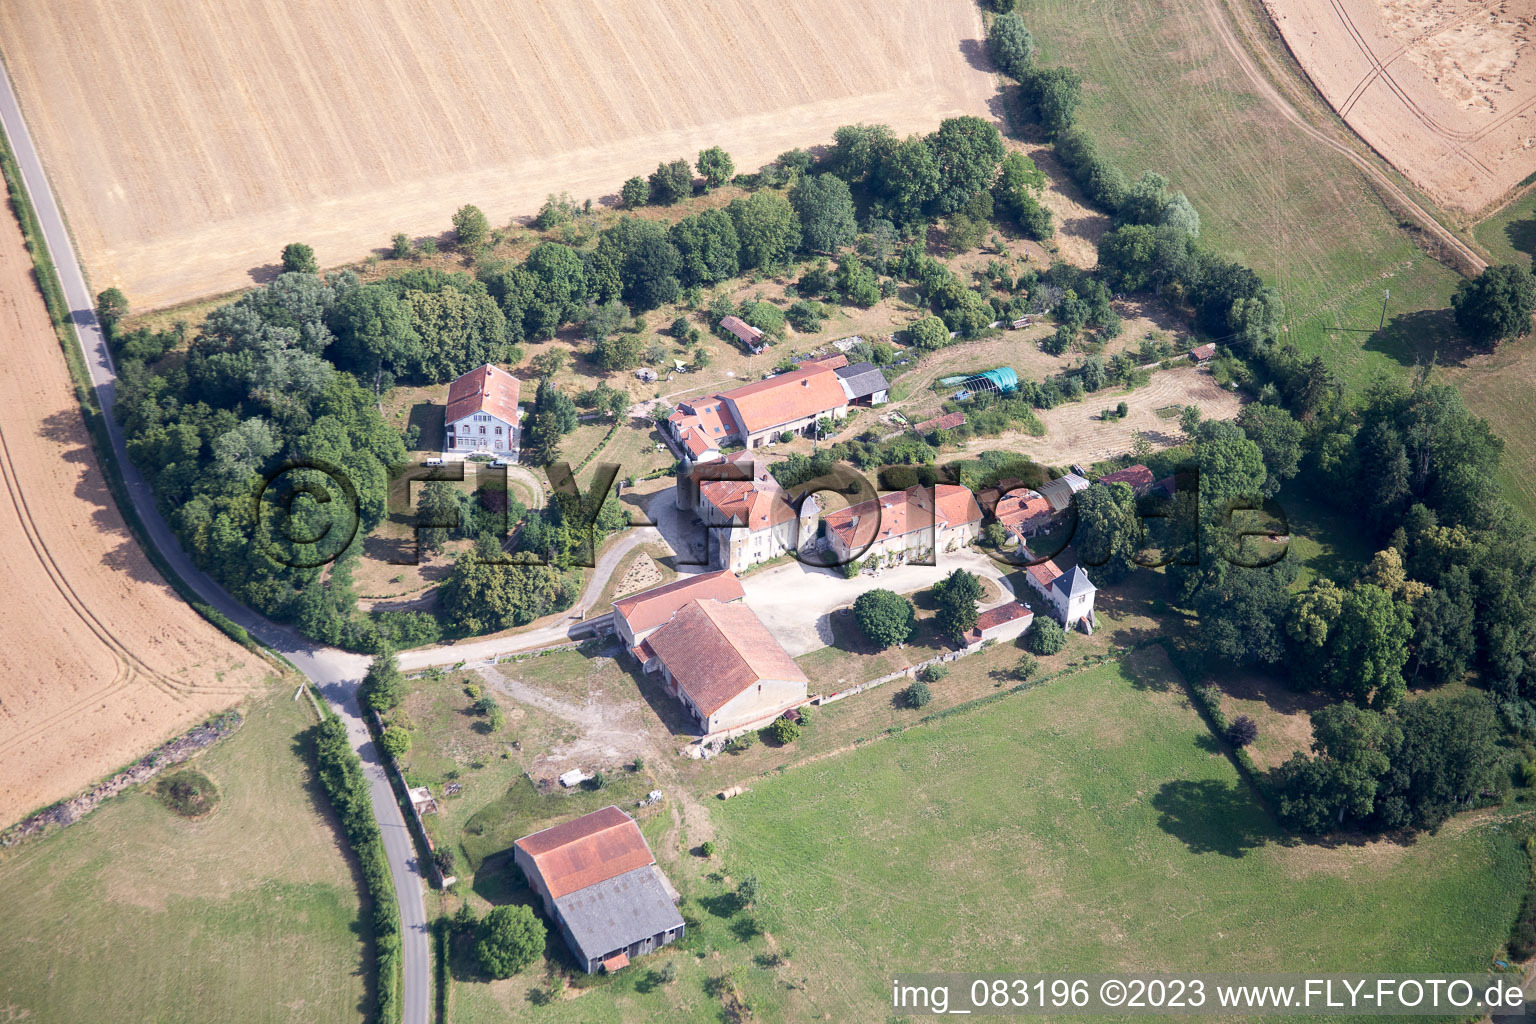 Aerial photograpy of Buissoncourt in the state Meurthe et Moselle, France